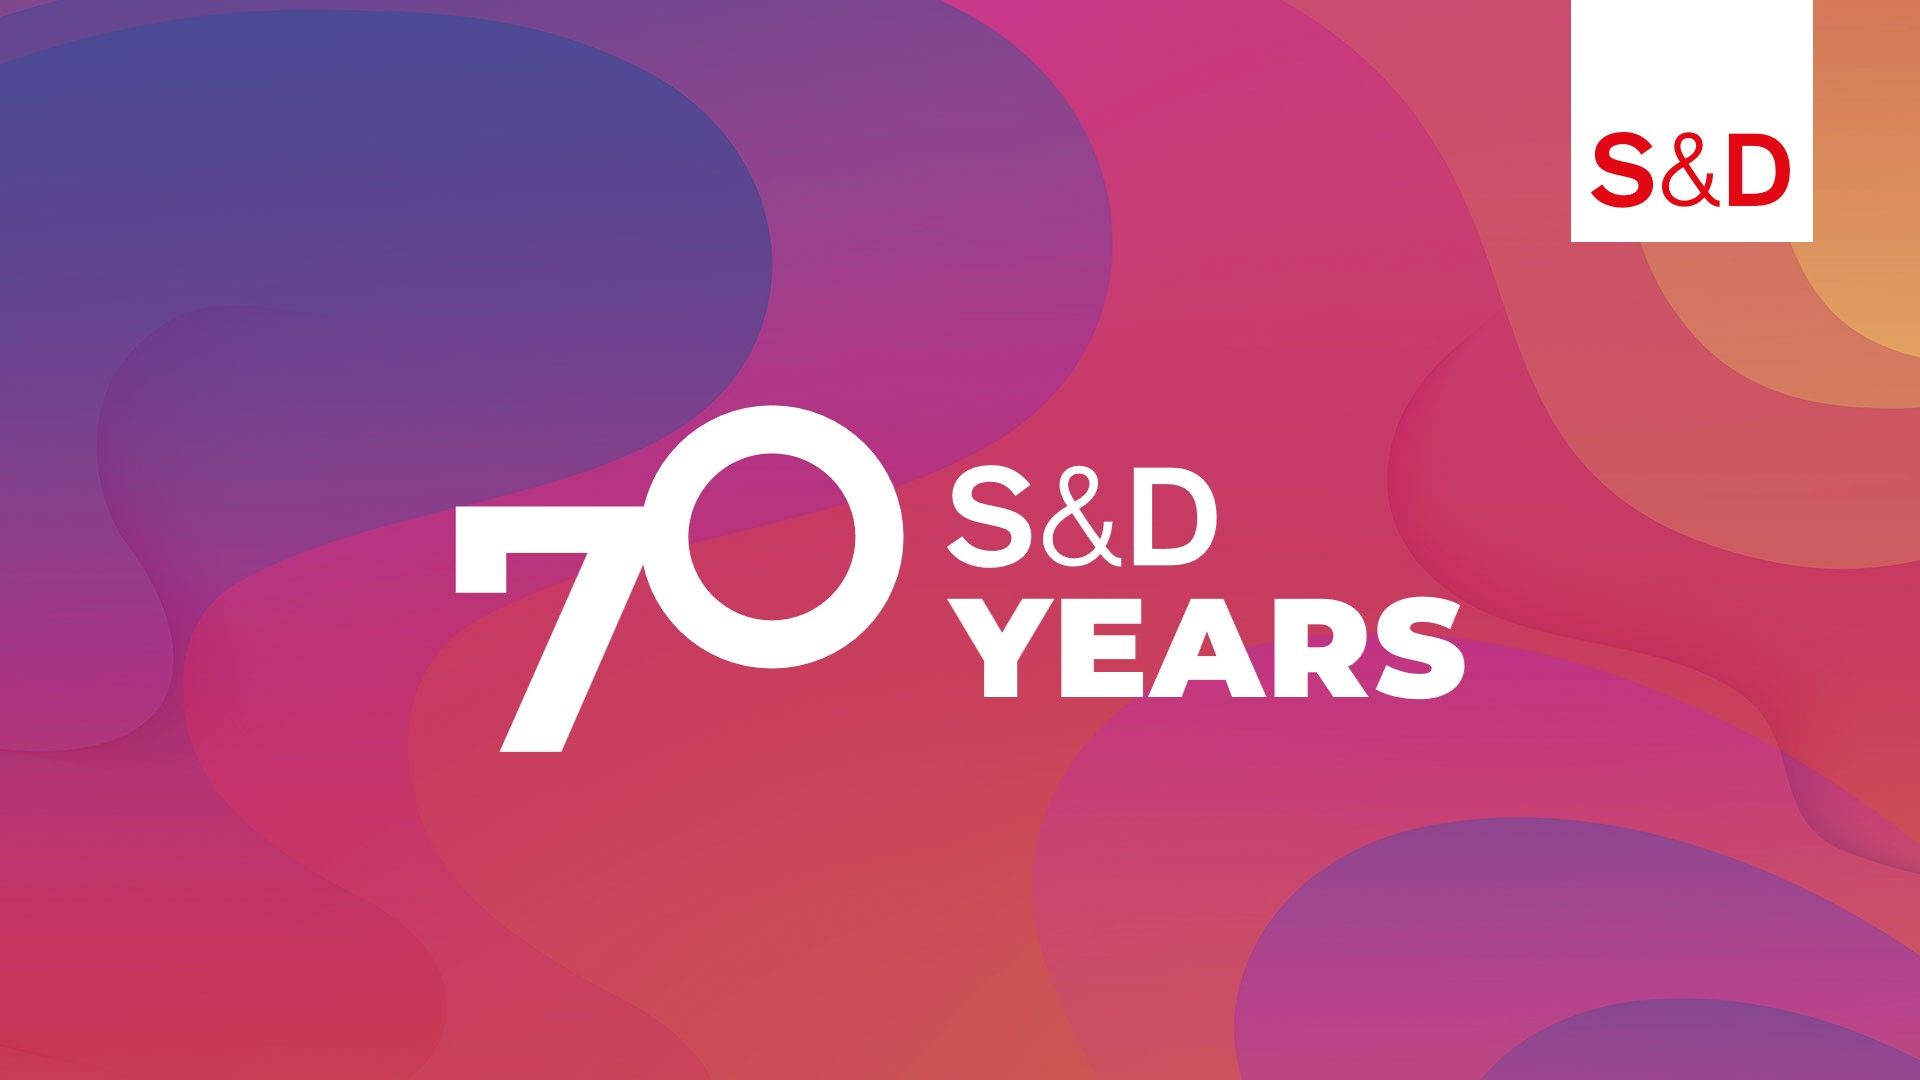 S&D Group: A celebration of 70 years of social progress